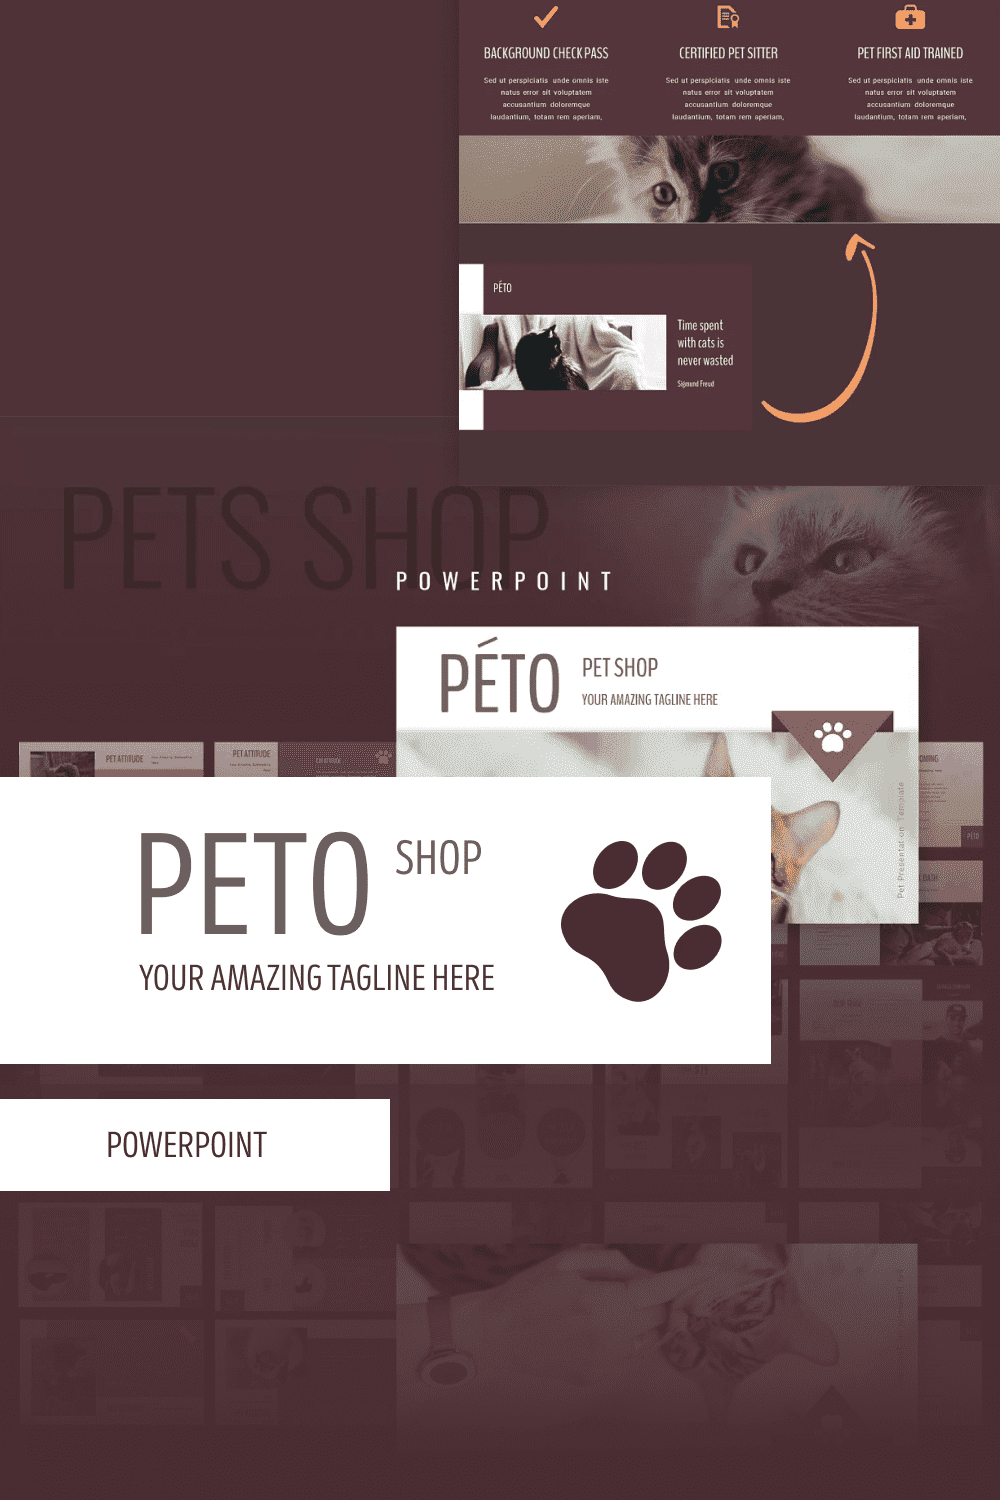 Peto Shop Powerpoint - Your Amazing Tagline Here.